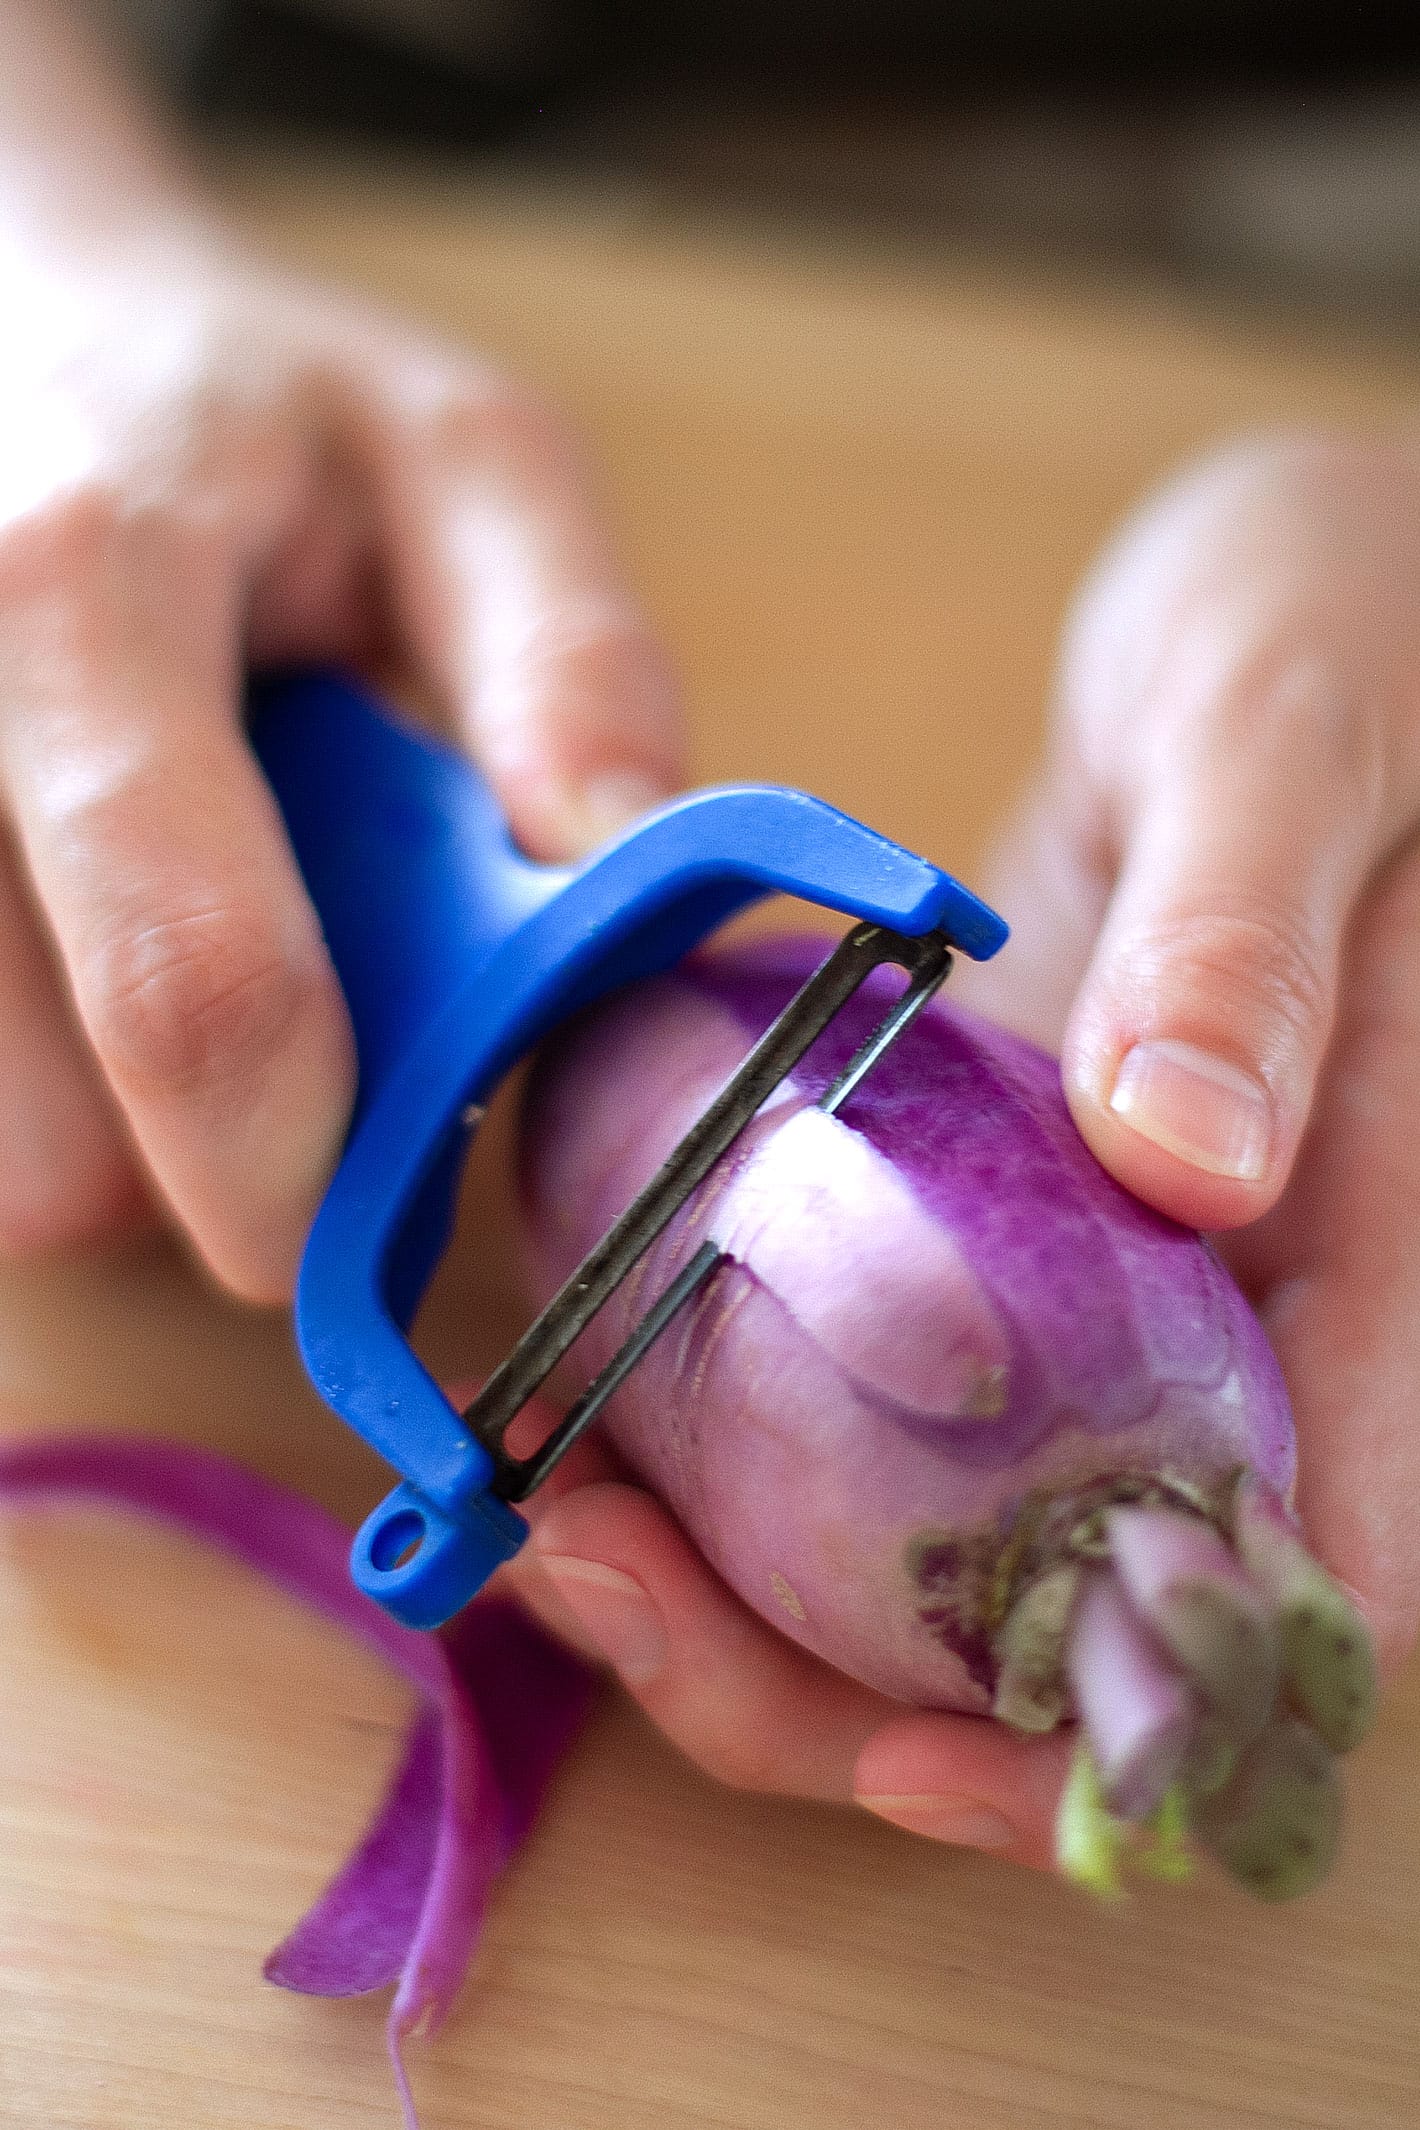 Hands holding a purple daikon radish and peeling it with a vegetable peeler.